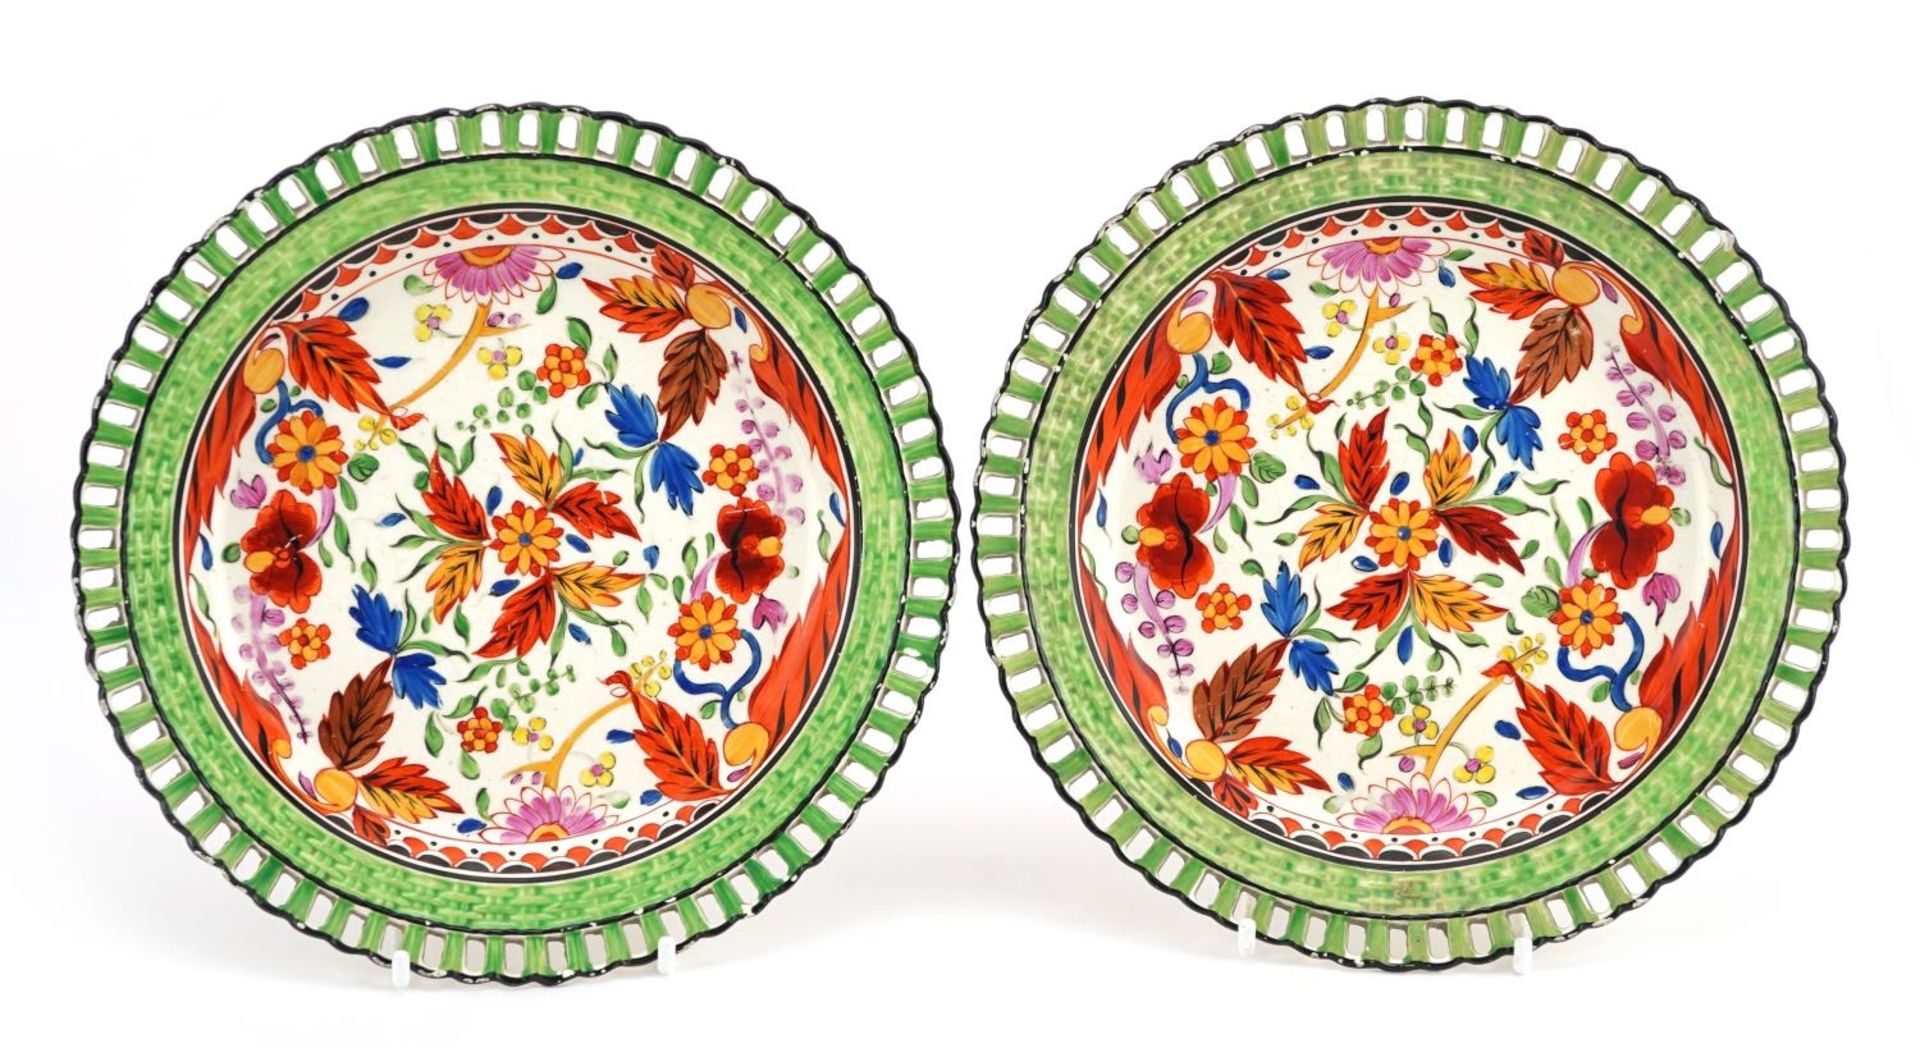 Pair of 19th century Creamware plates with pierced borders hand painted with flowers, each 19cm in